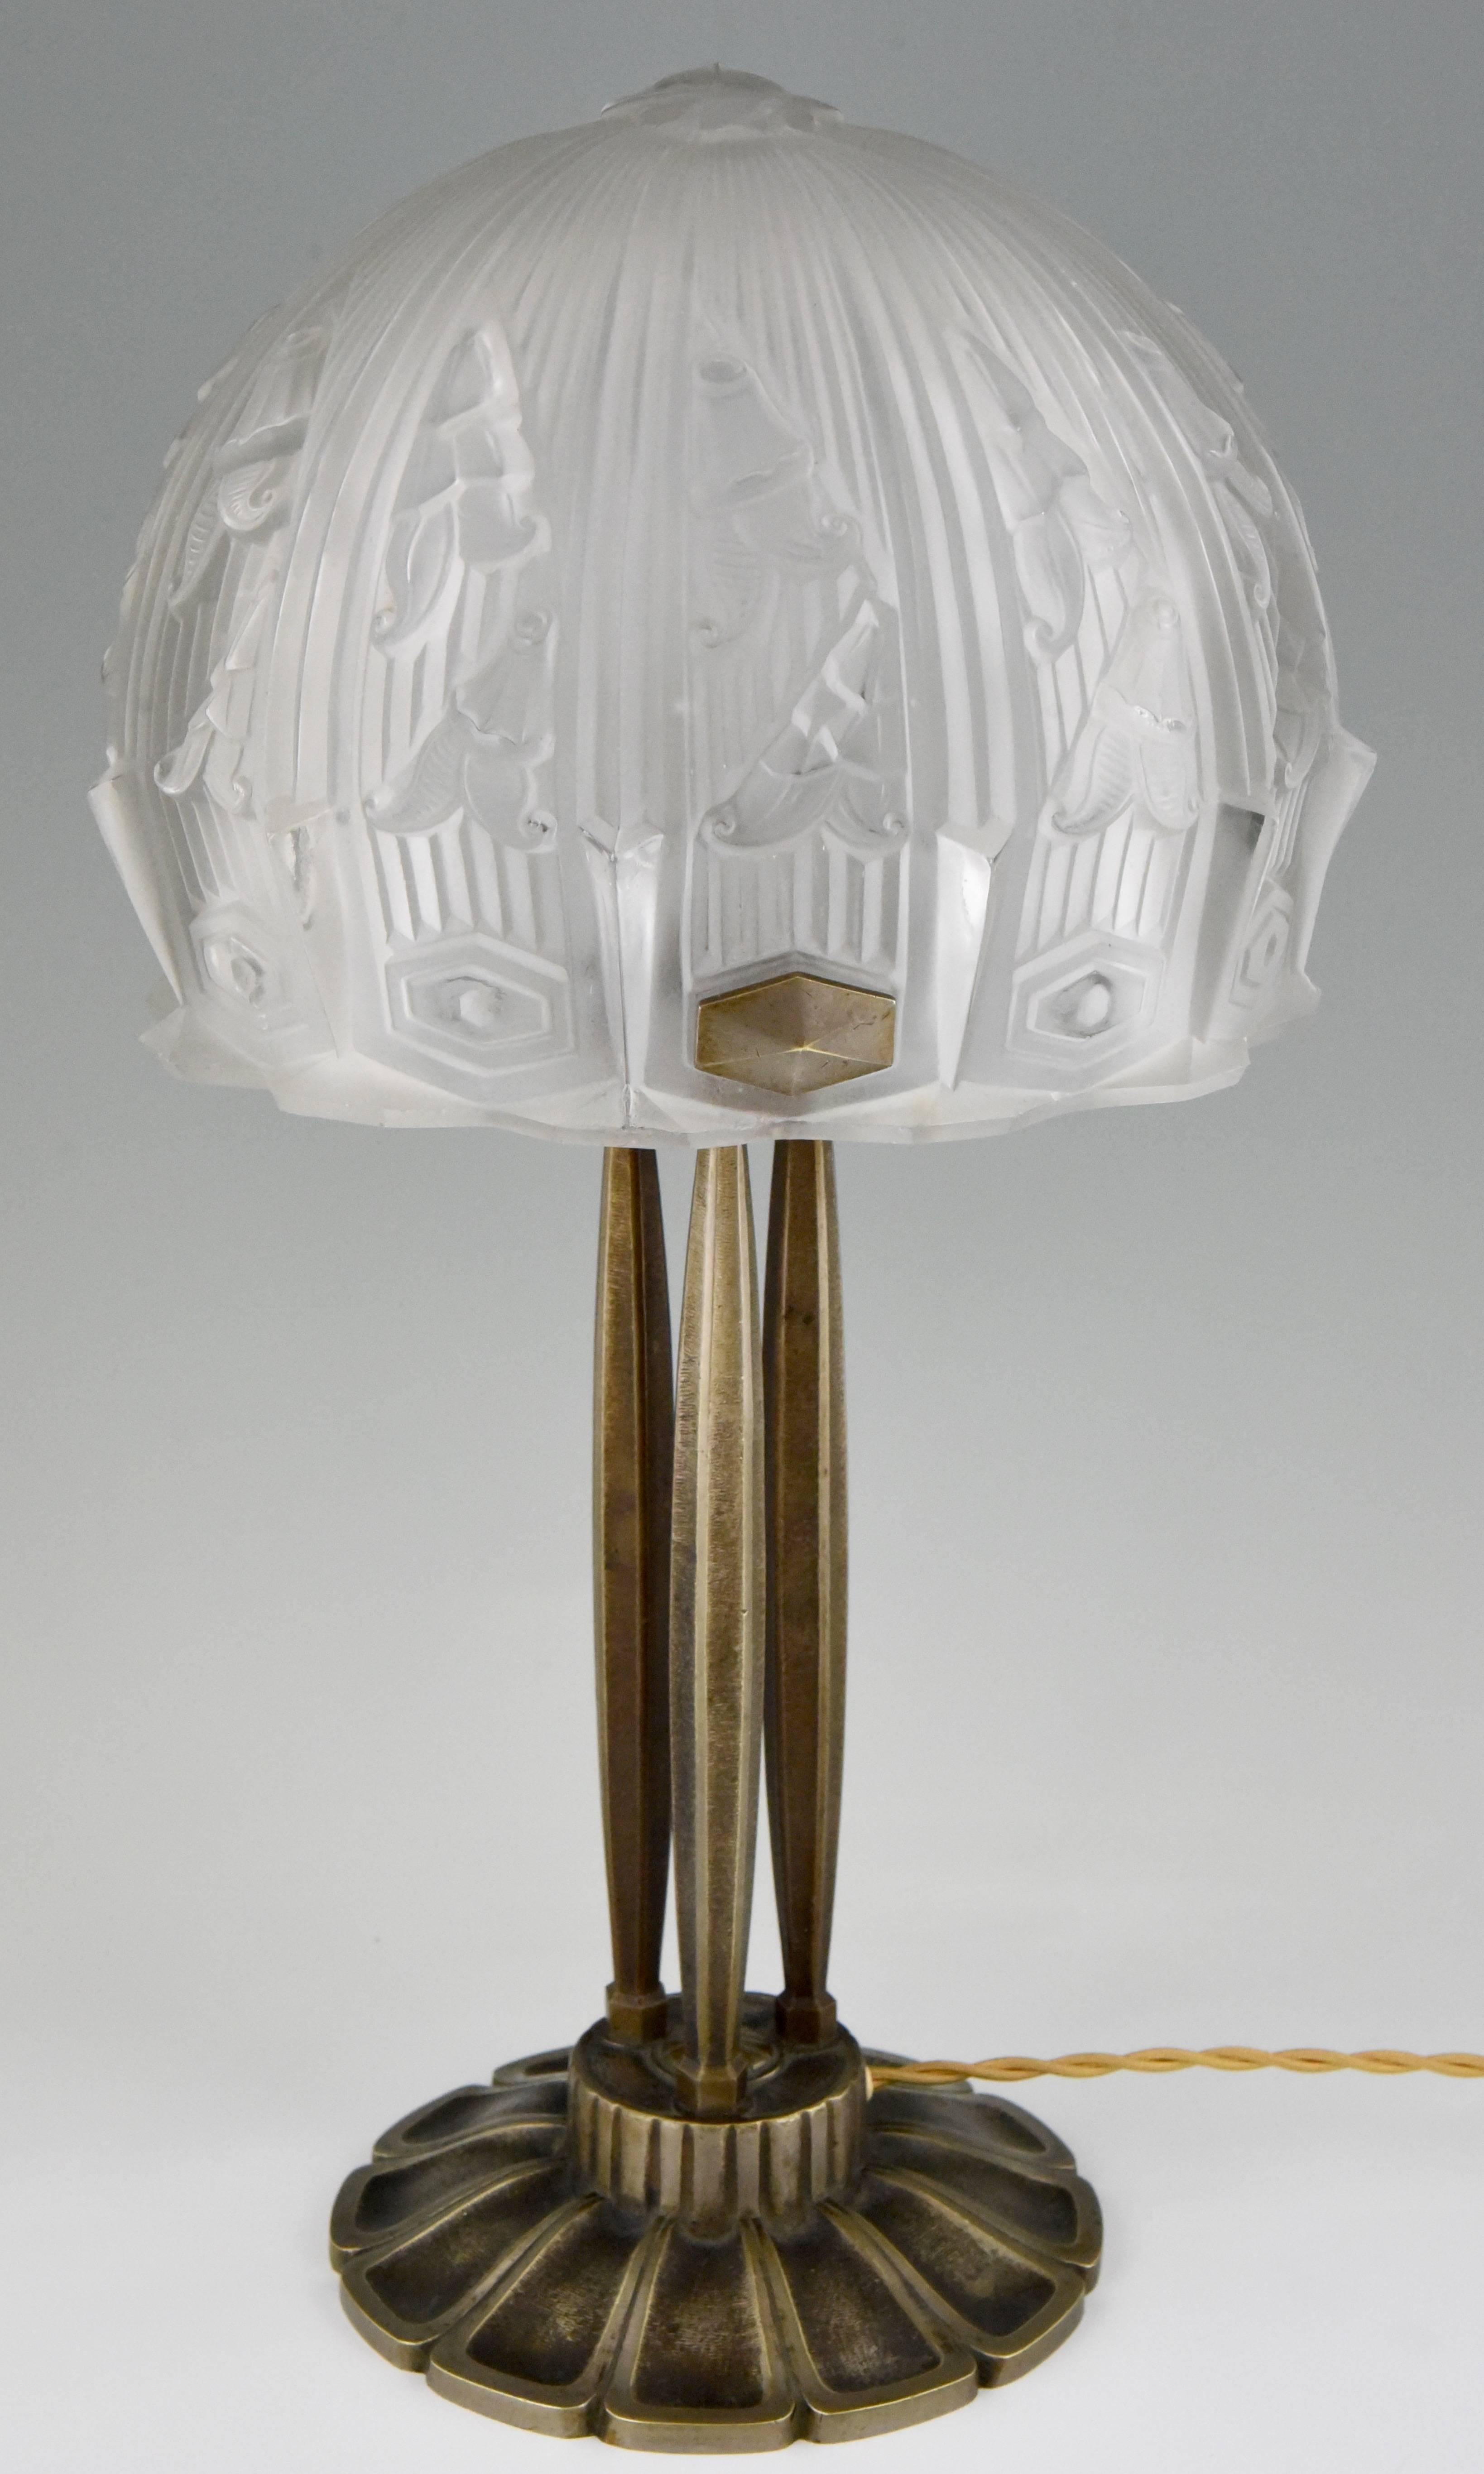 French Art Deco Glass and Bronze Desk or Table Lamp RM, France, 1930